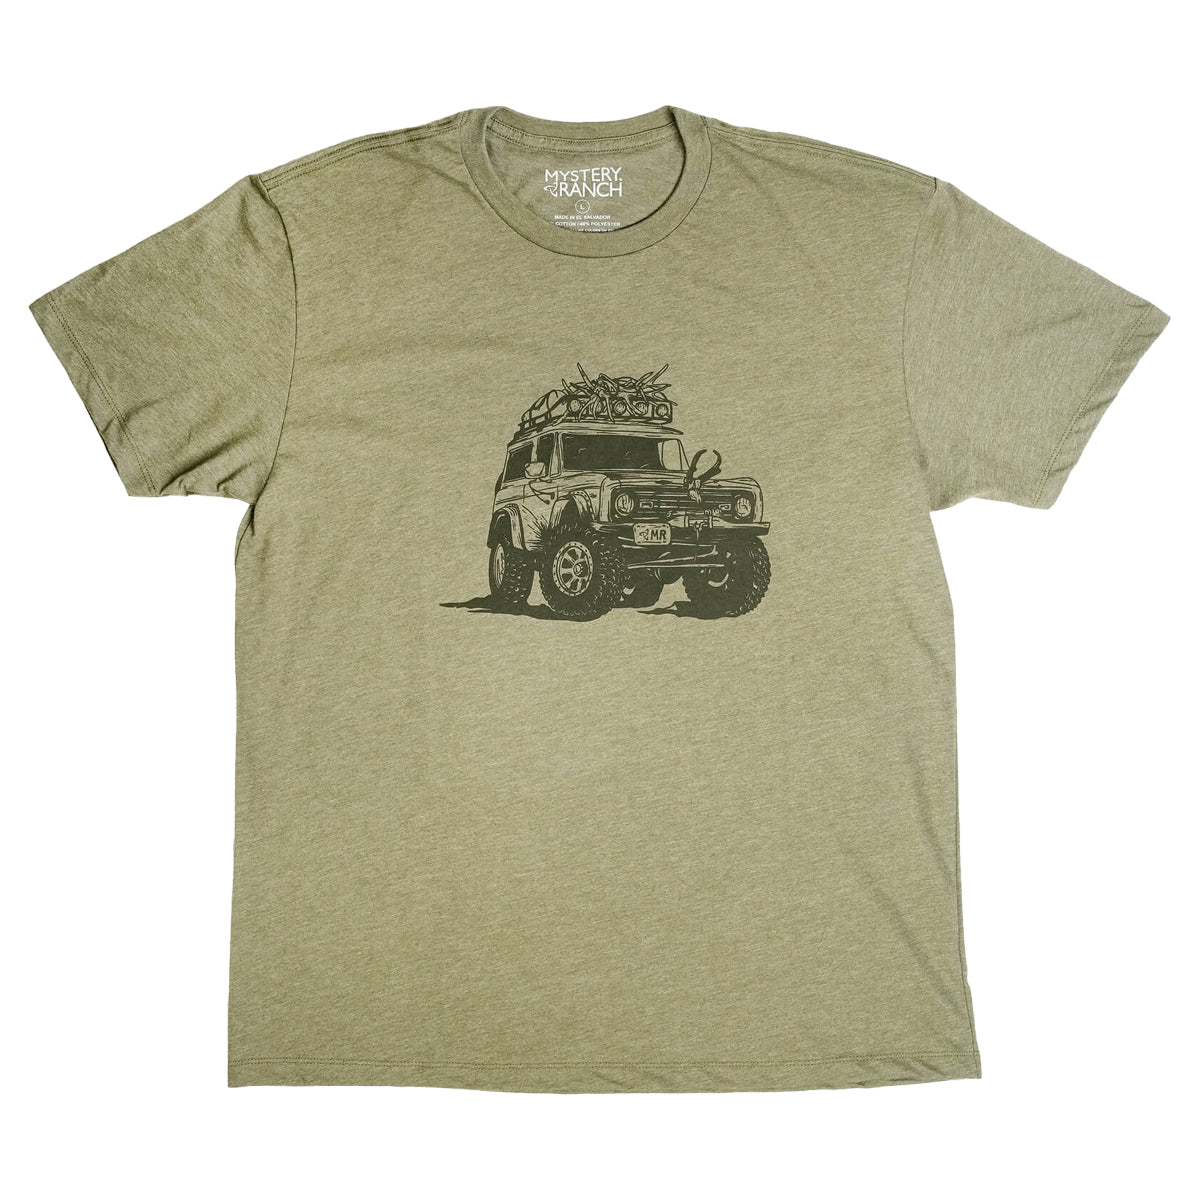 Mystery Ranch Speed Goat Rig T-Shirt in  by GOHUNT | Mystery Ranch - GOHUNT Shop